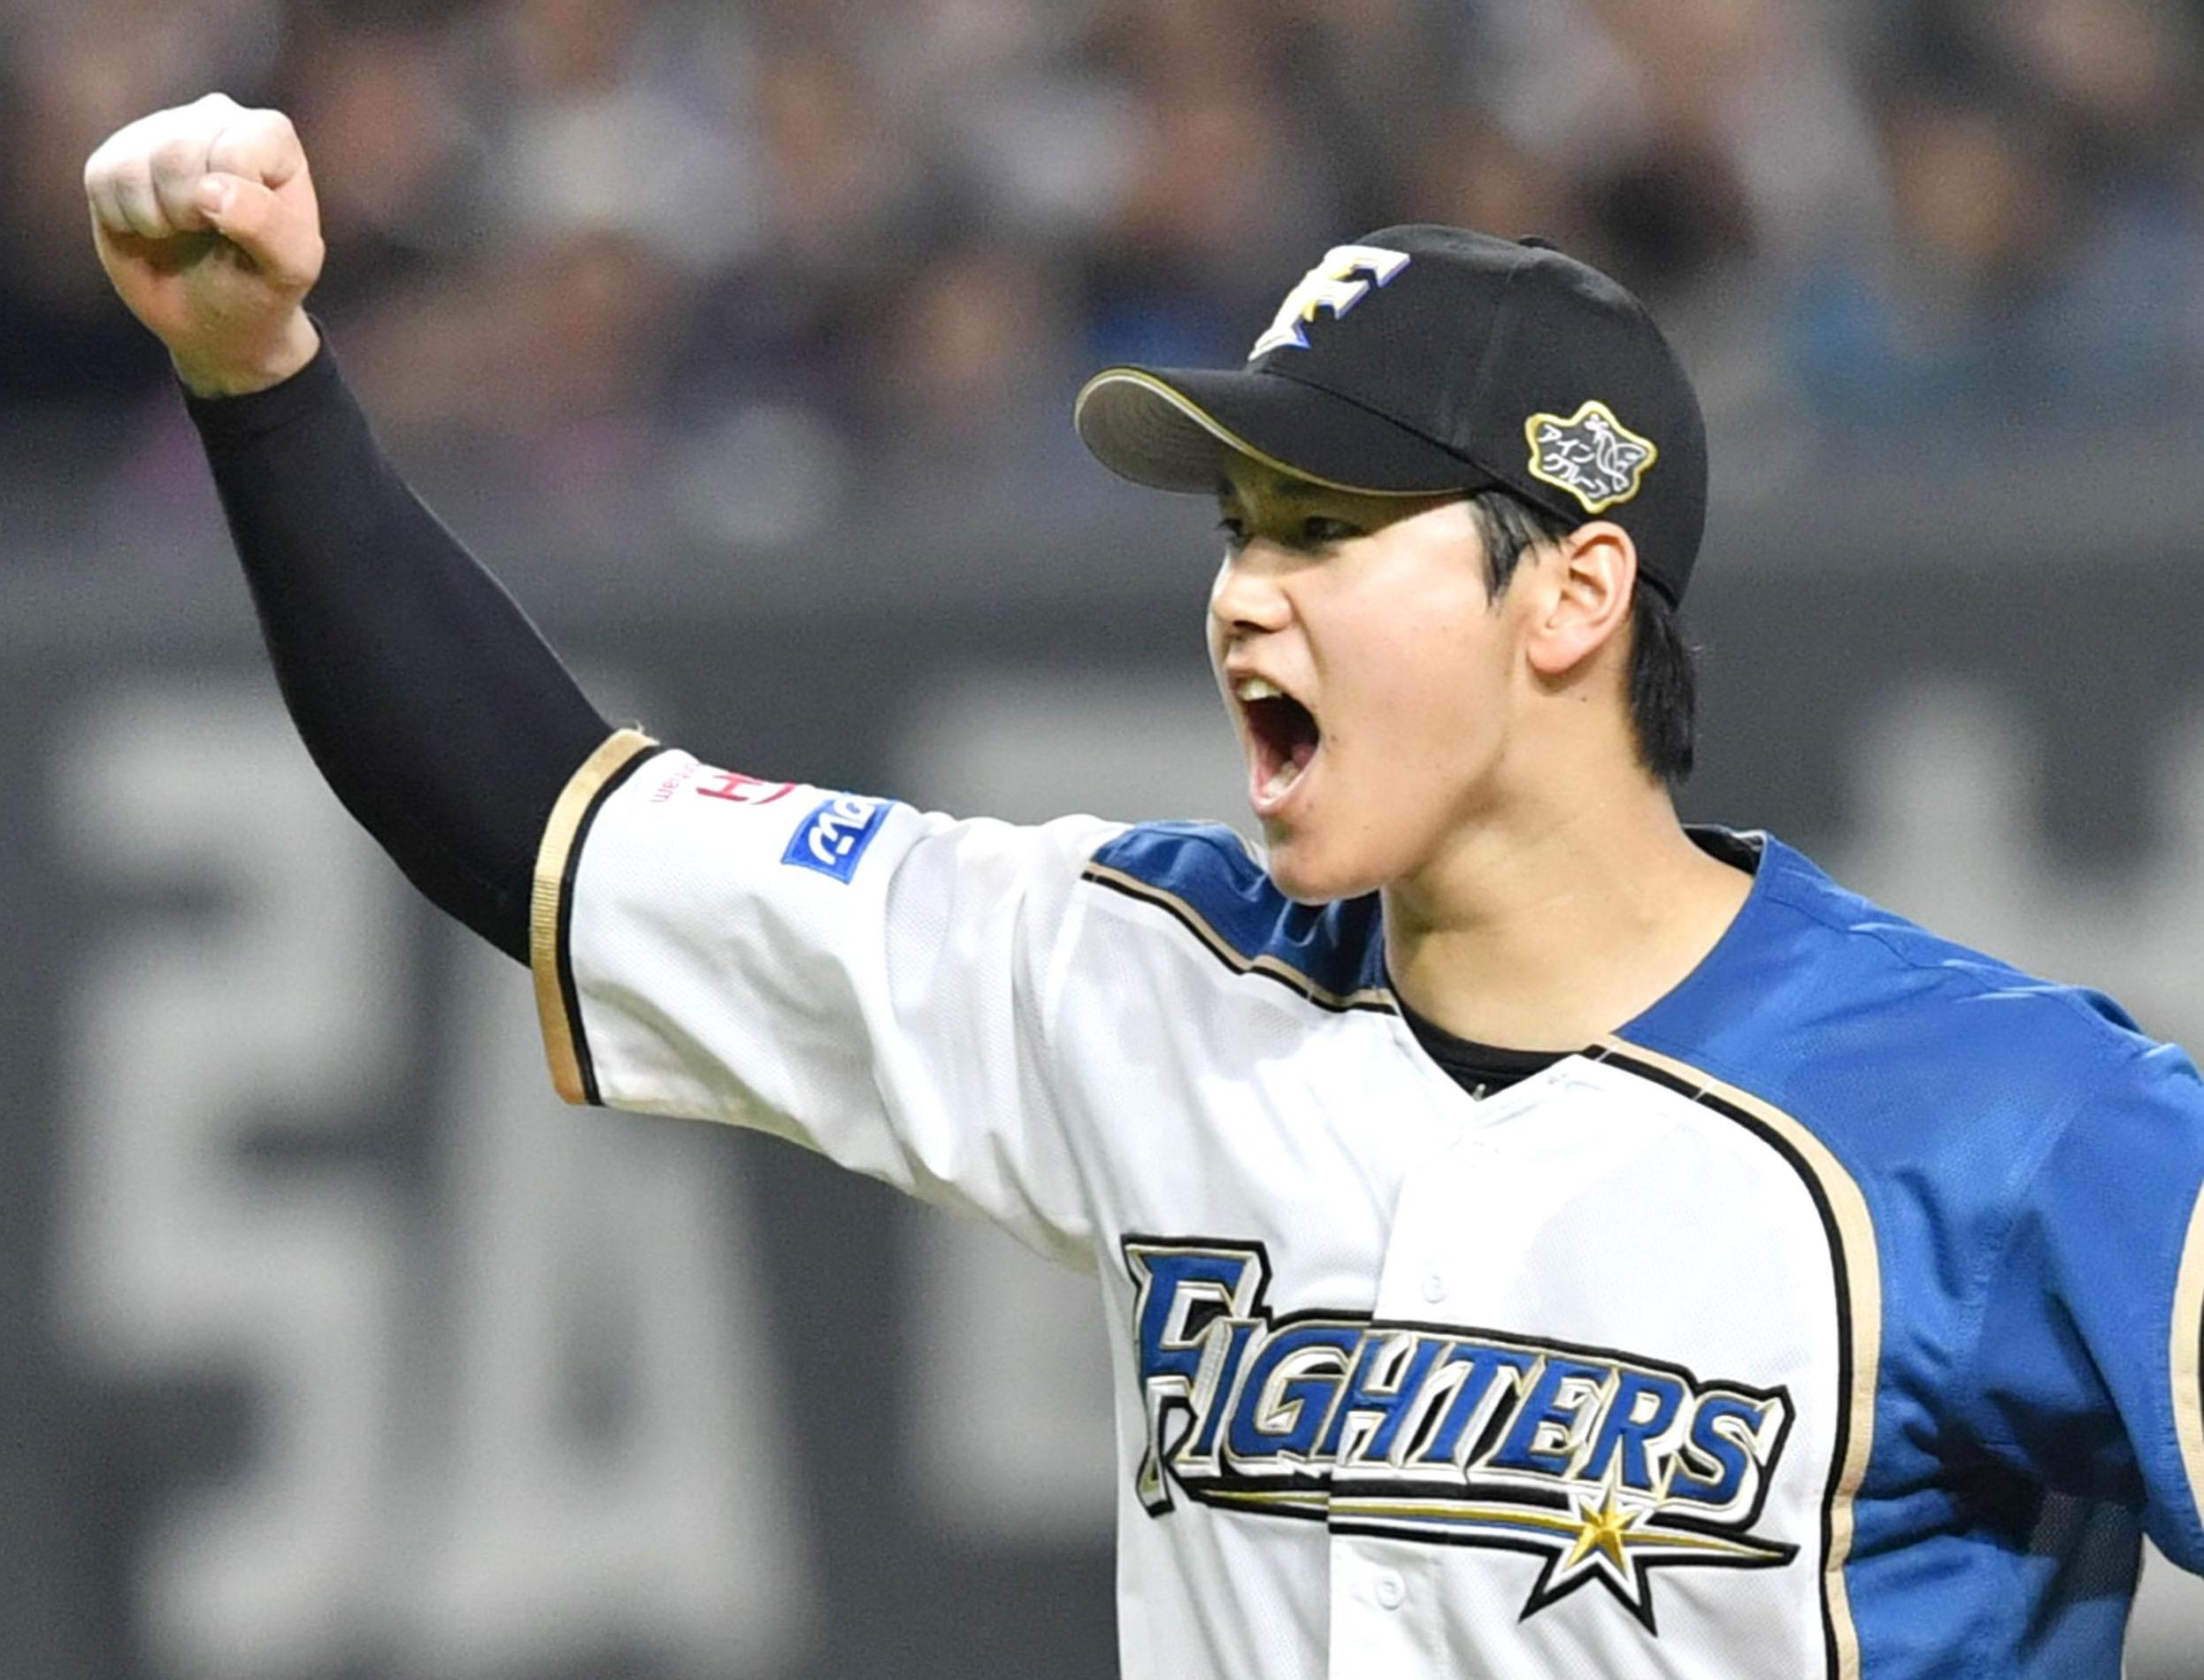 Hokkaido Nippon-Ham Fighters starter Syohei Otani reacts in the 1st inning  during a Nippon Professional Baseball's Pacific League match against Orix  Buffaloes at Sapporo Dome in Sapporo, Hokkaido on Oct. 4, 2017.